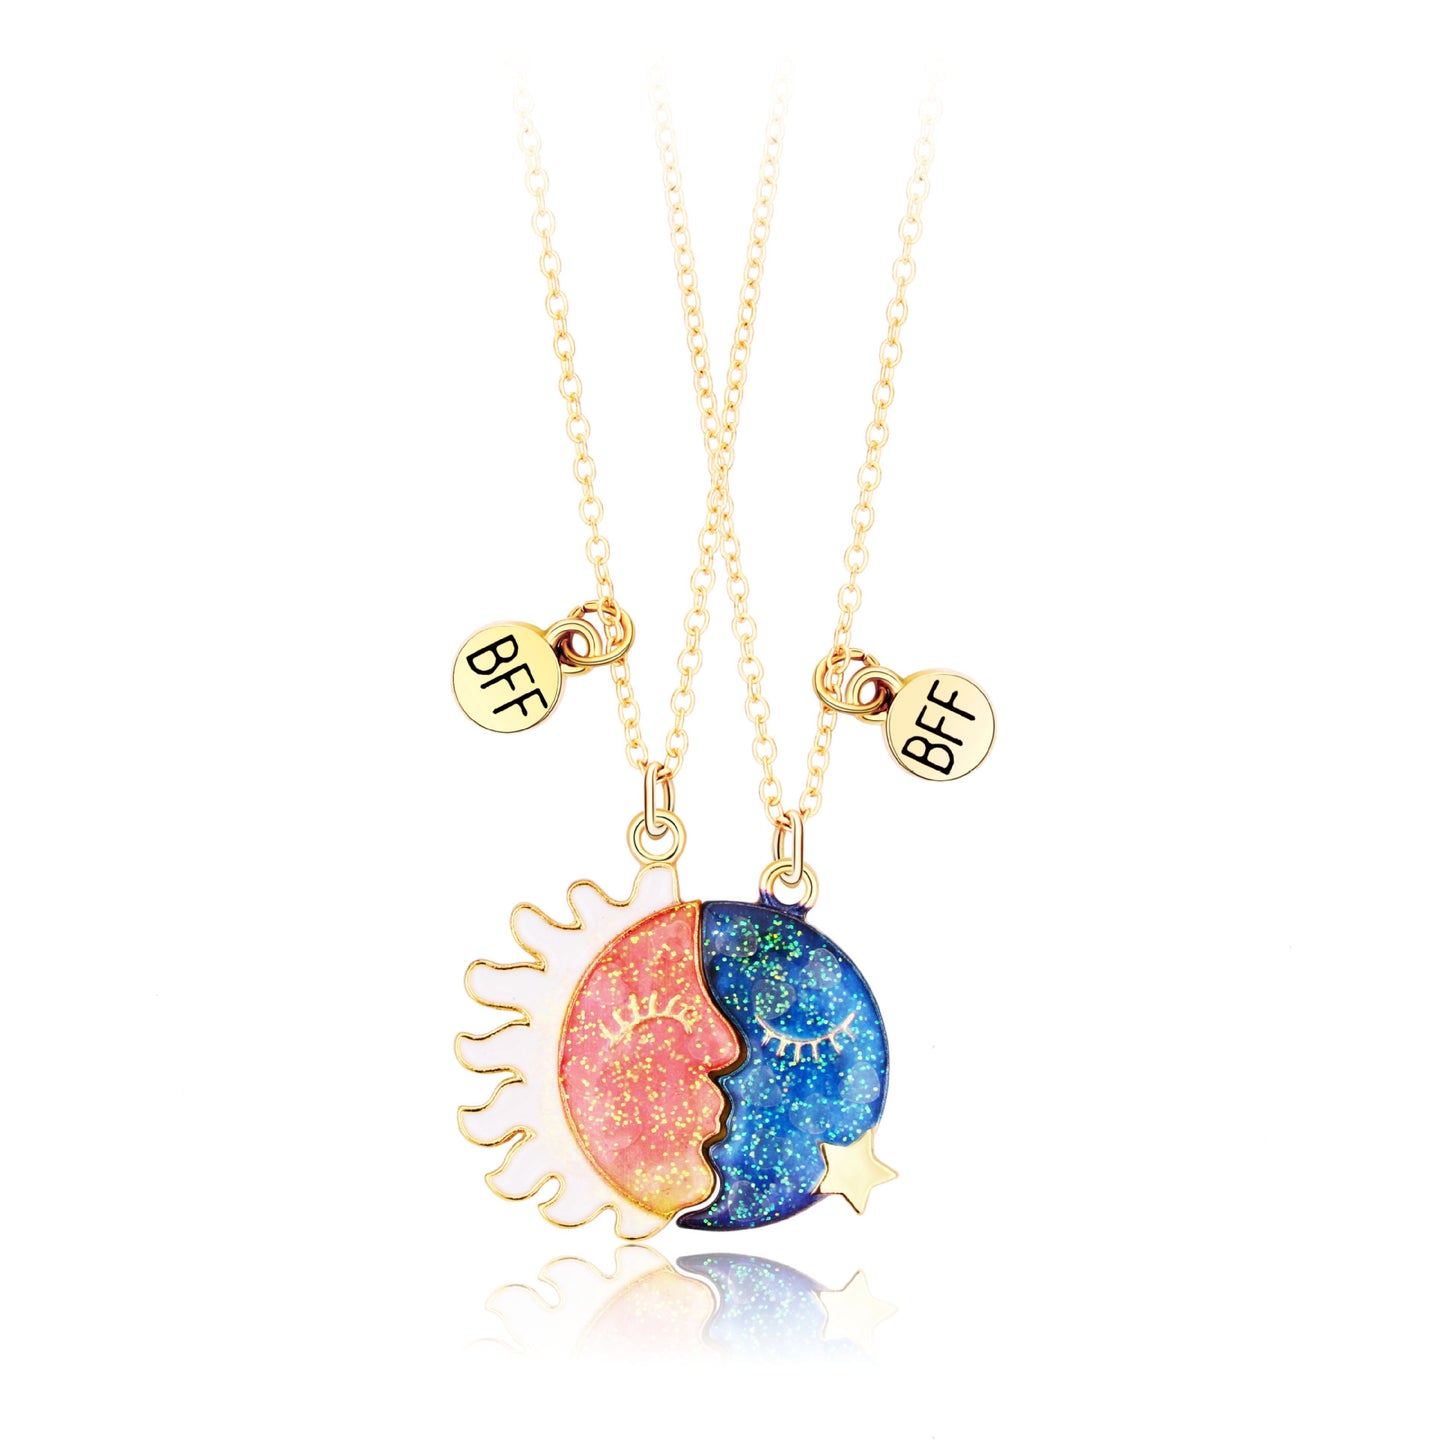 Sun and Moon Night Glow Friendship Necklaces Gift